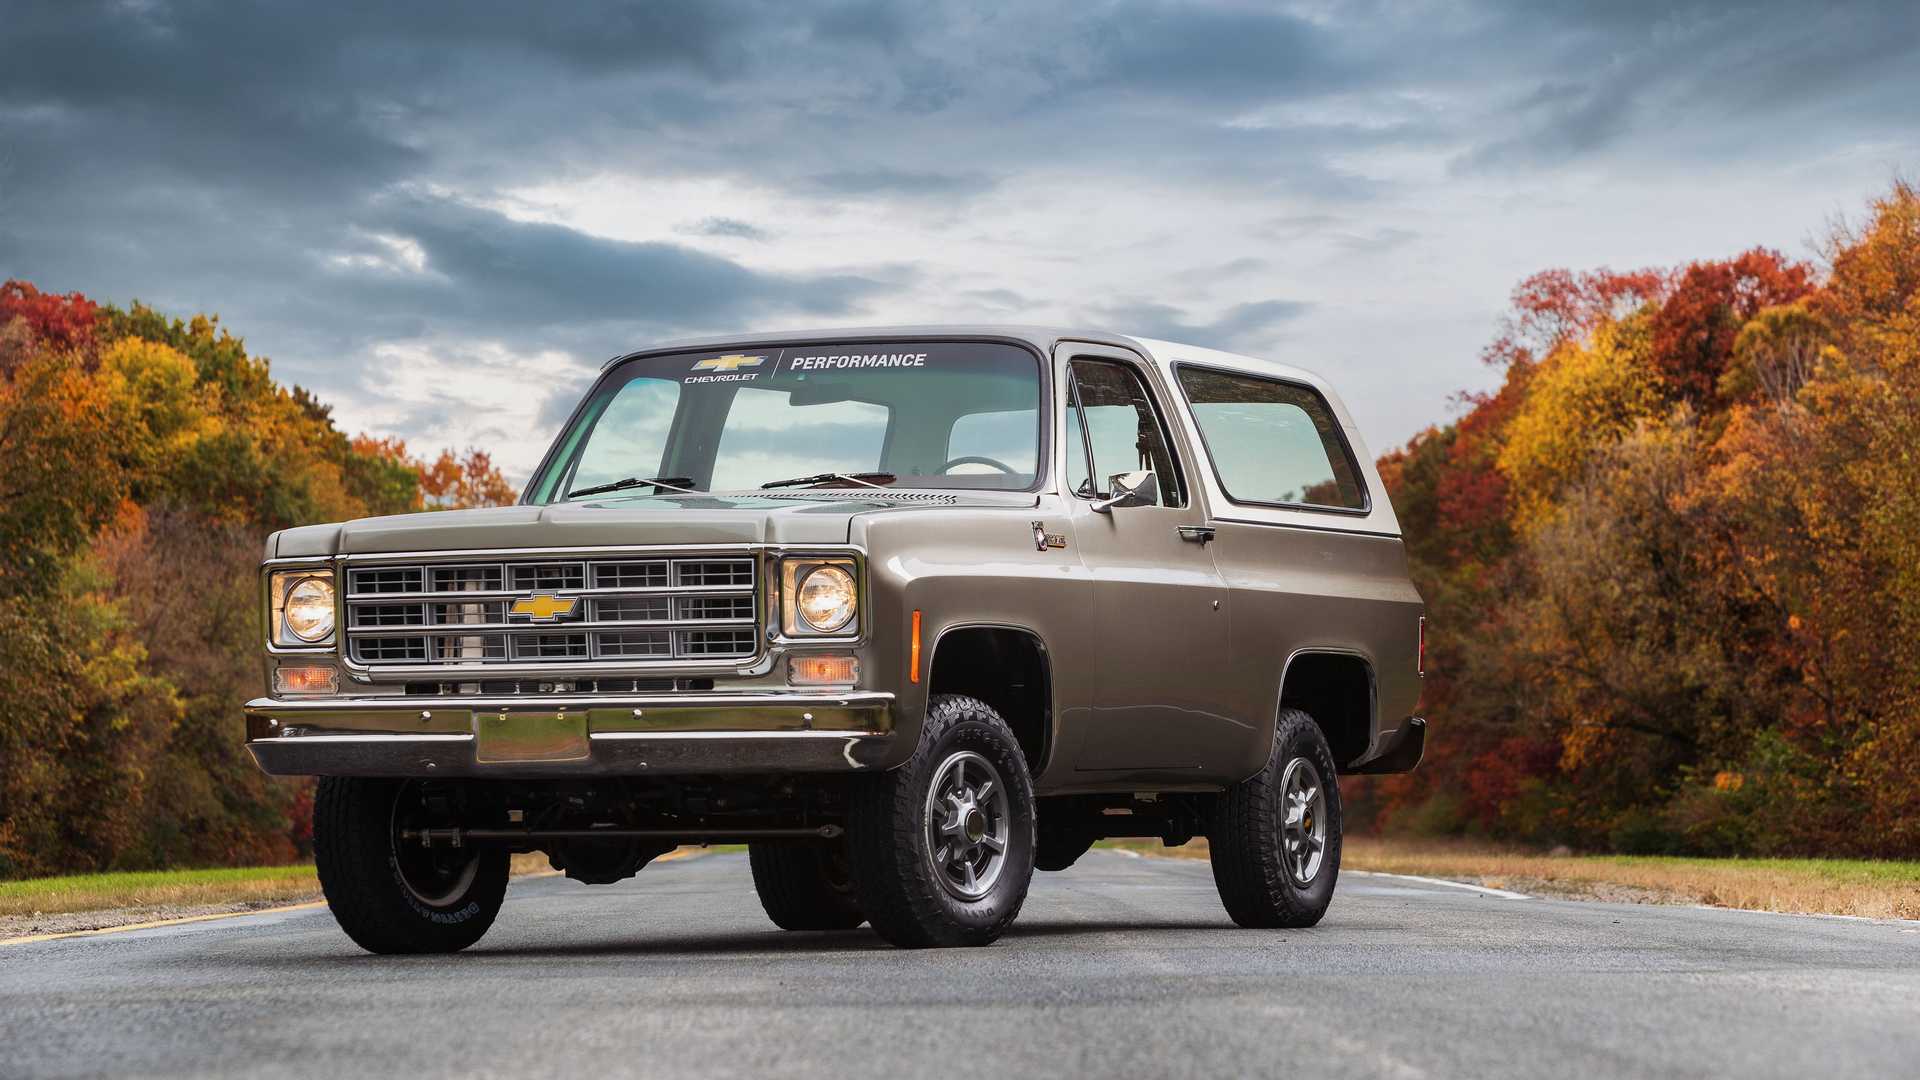 Want To Convert Your Old Truck To Electric: GM eCrate Package Is The Answer